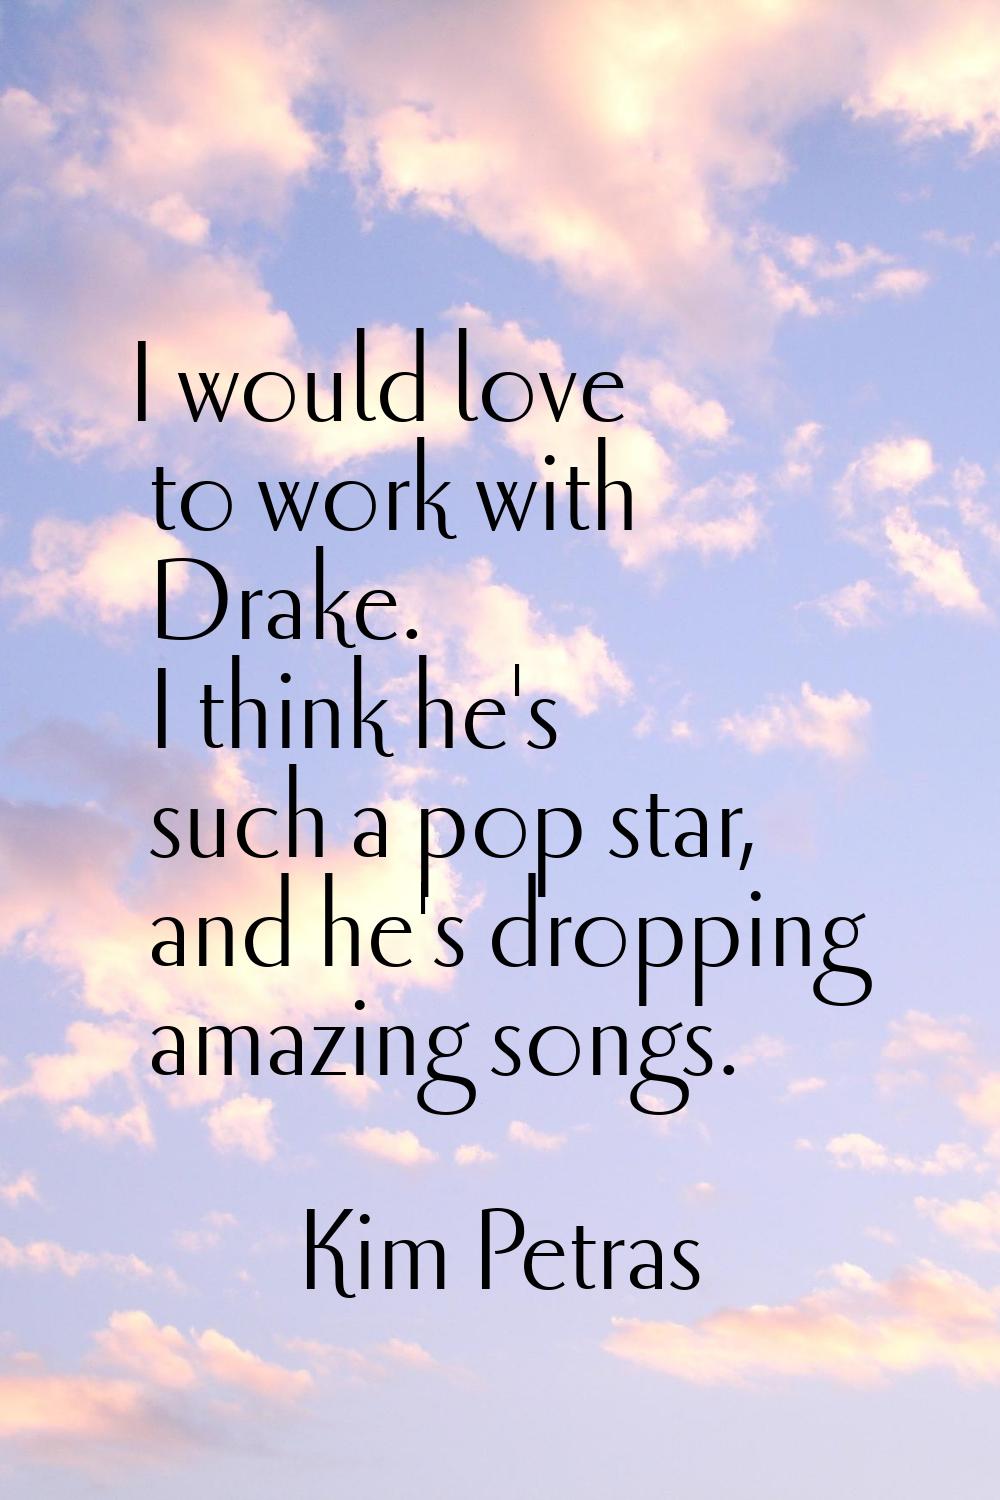 I would love to work with Drake. I think he's such a pop star, and he's dropping amazing songs.